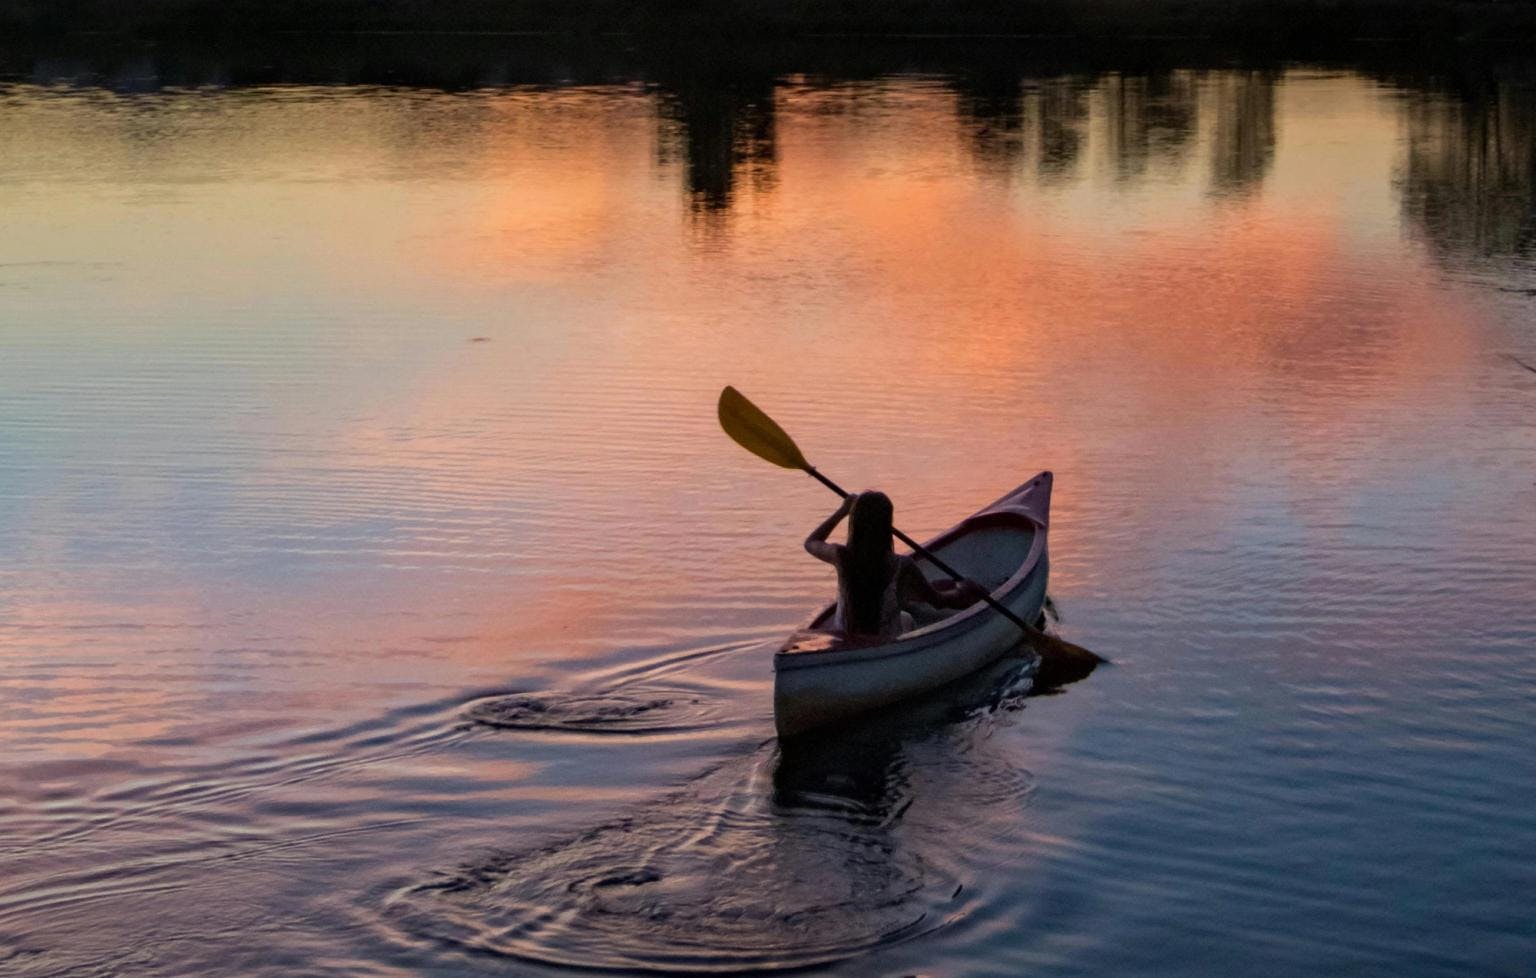 A person in a canoe sits on a lake with sunset colors reflected off the water